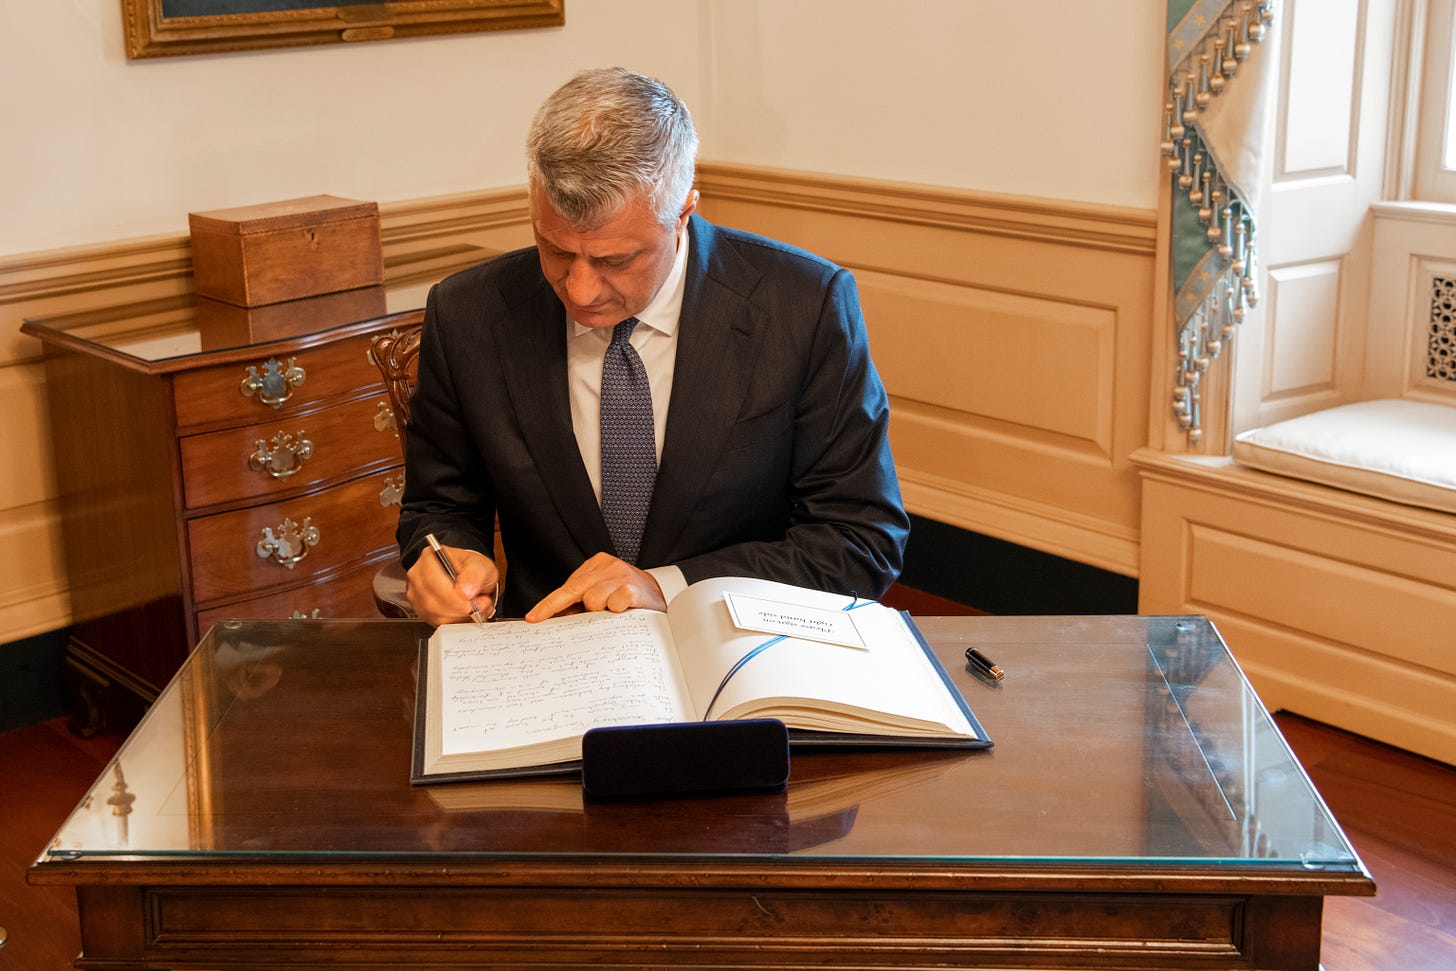 Photo of then-Kosovan President Hashim Thaçi signing the US State Department guestbook in February 2020